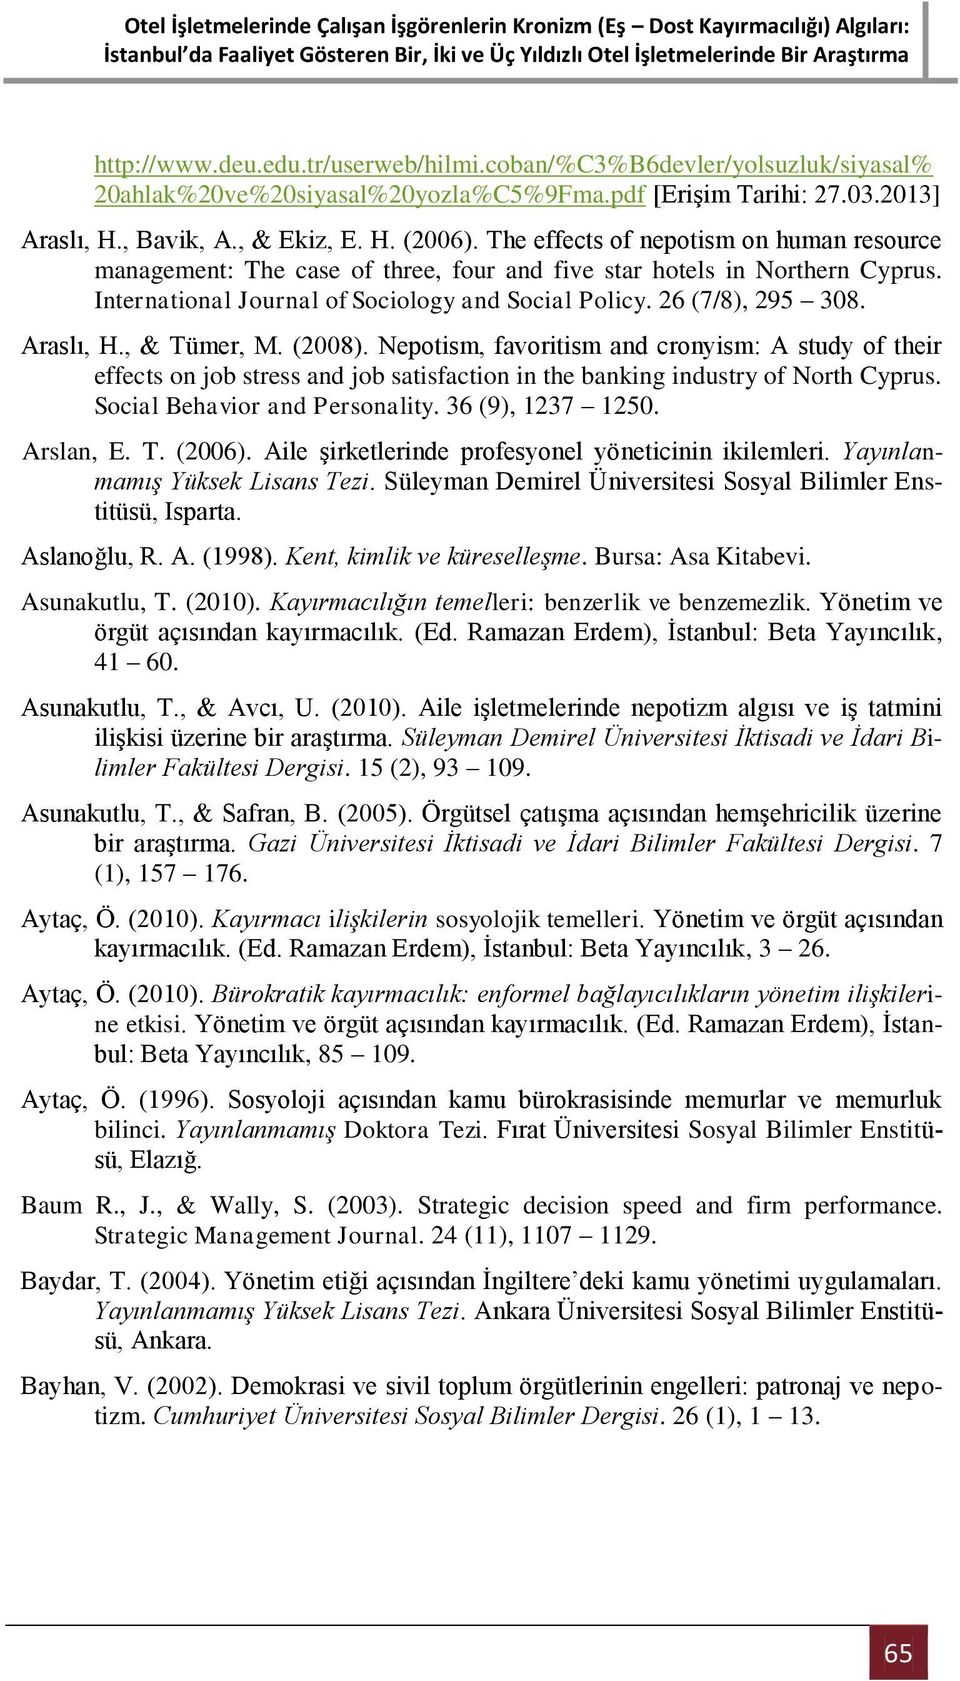 Araslı, H., & Tümer, M. (2008). Nepotism, favoritism and cronyism: A study of their effects on job stress and job satisfaction in the banking industry of North Cyprus. Social Behavior and Personality.